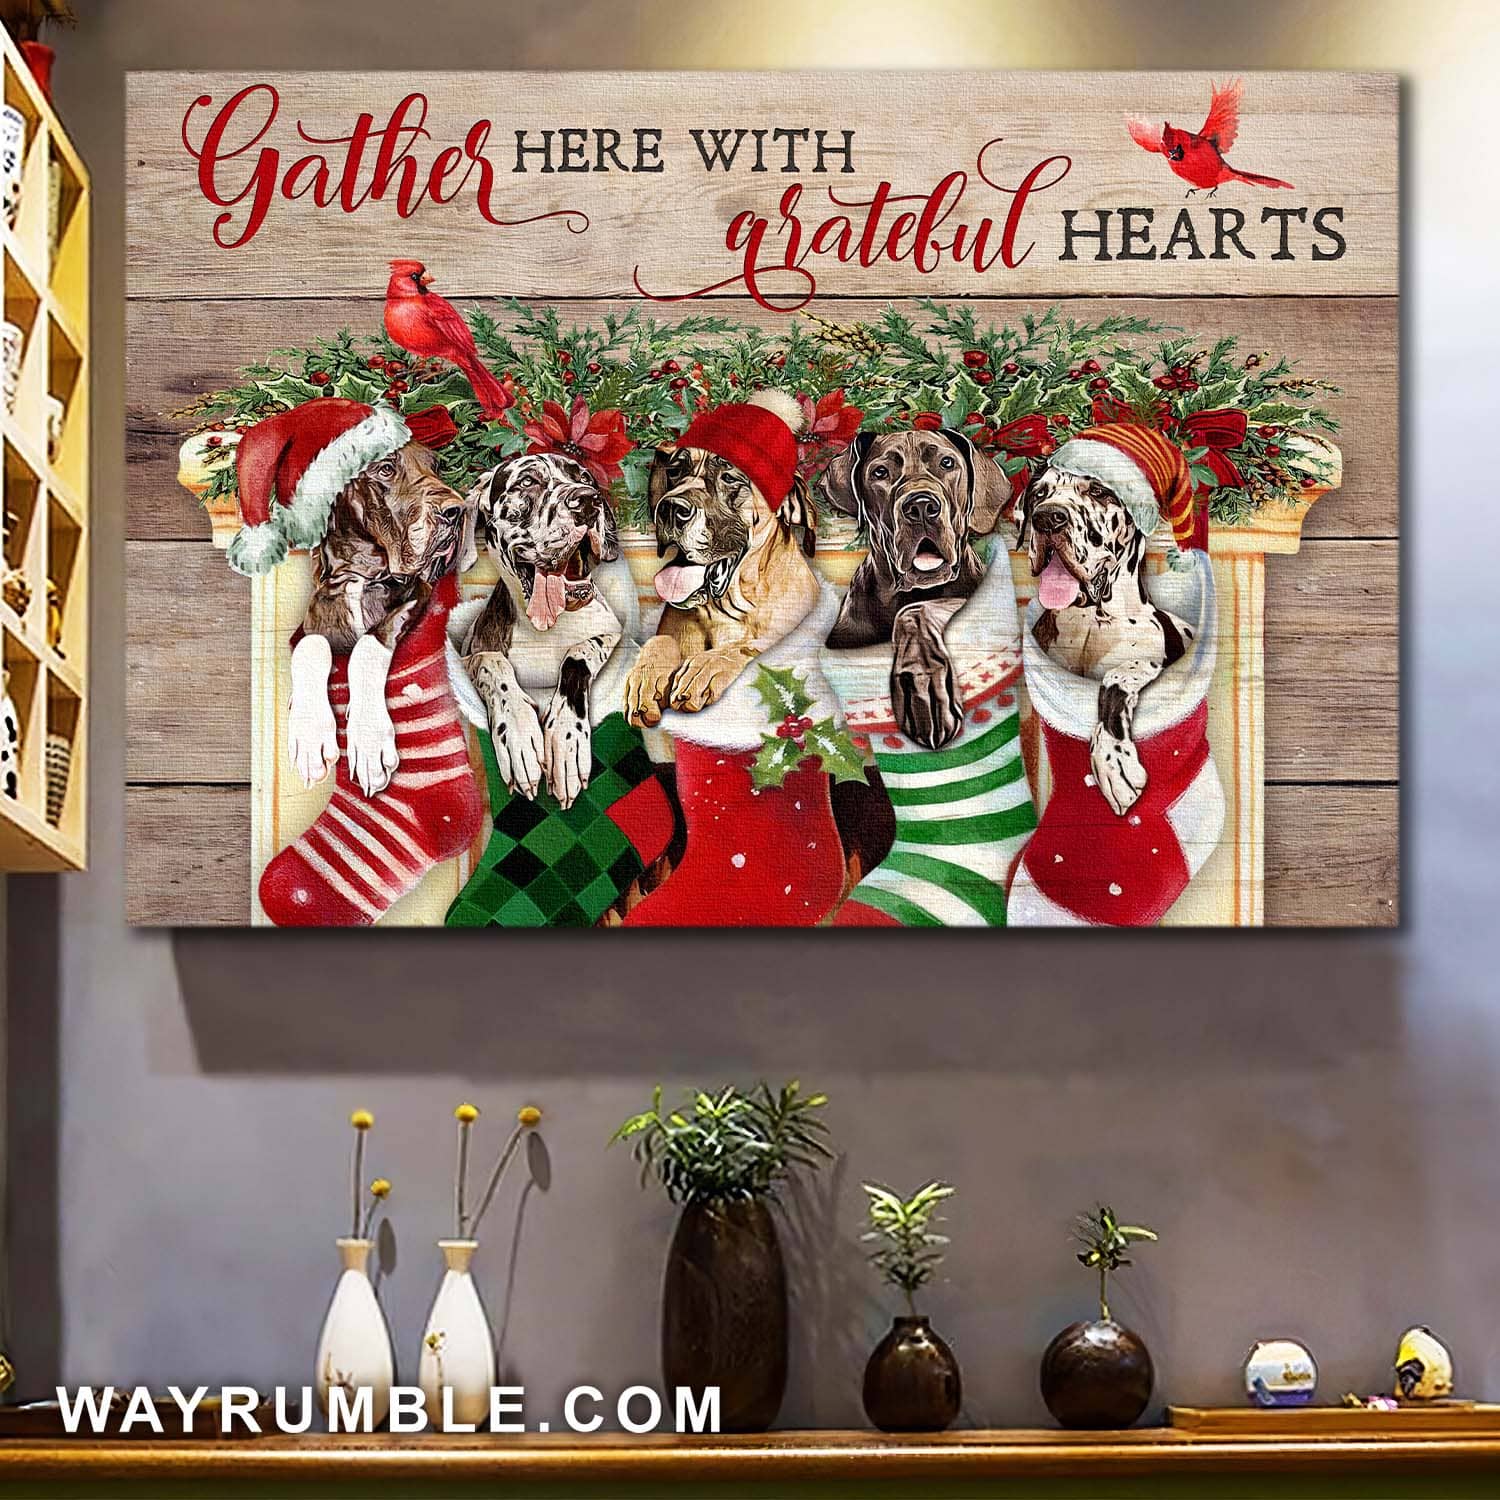 Great Dane, Christmas Sock, Cardinal, Gather here with grateful hearts - Dog Christmas Landscape Canvas Prints, Wall Art